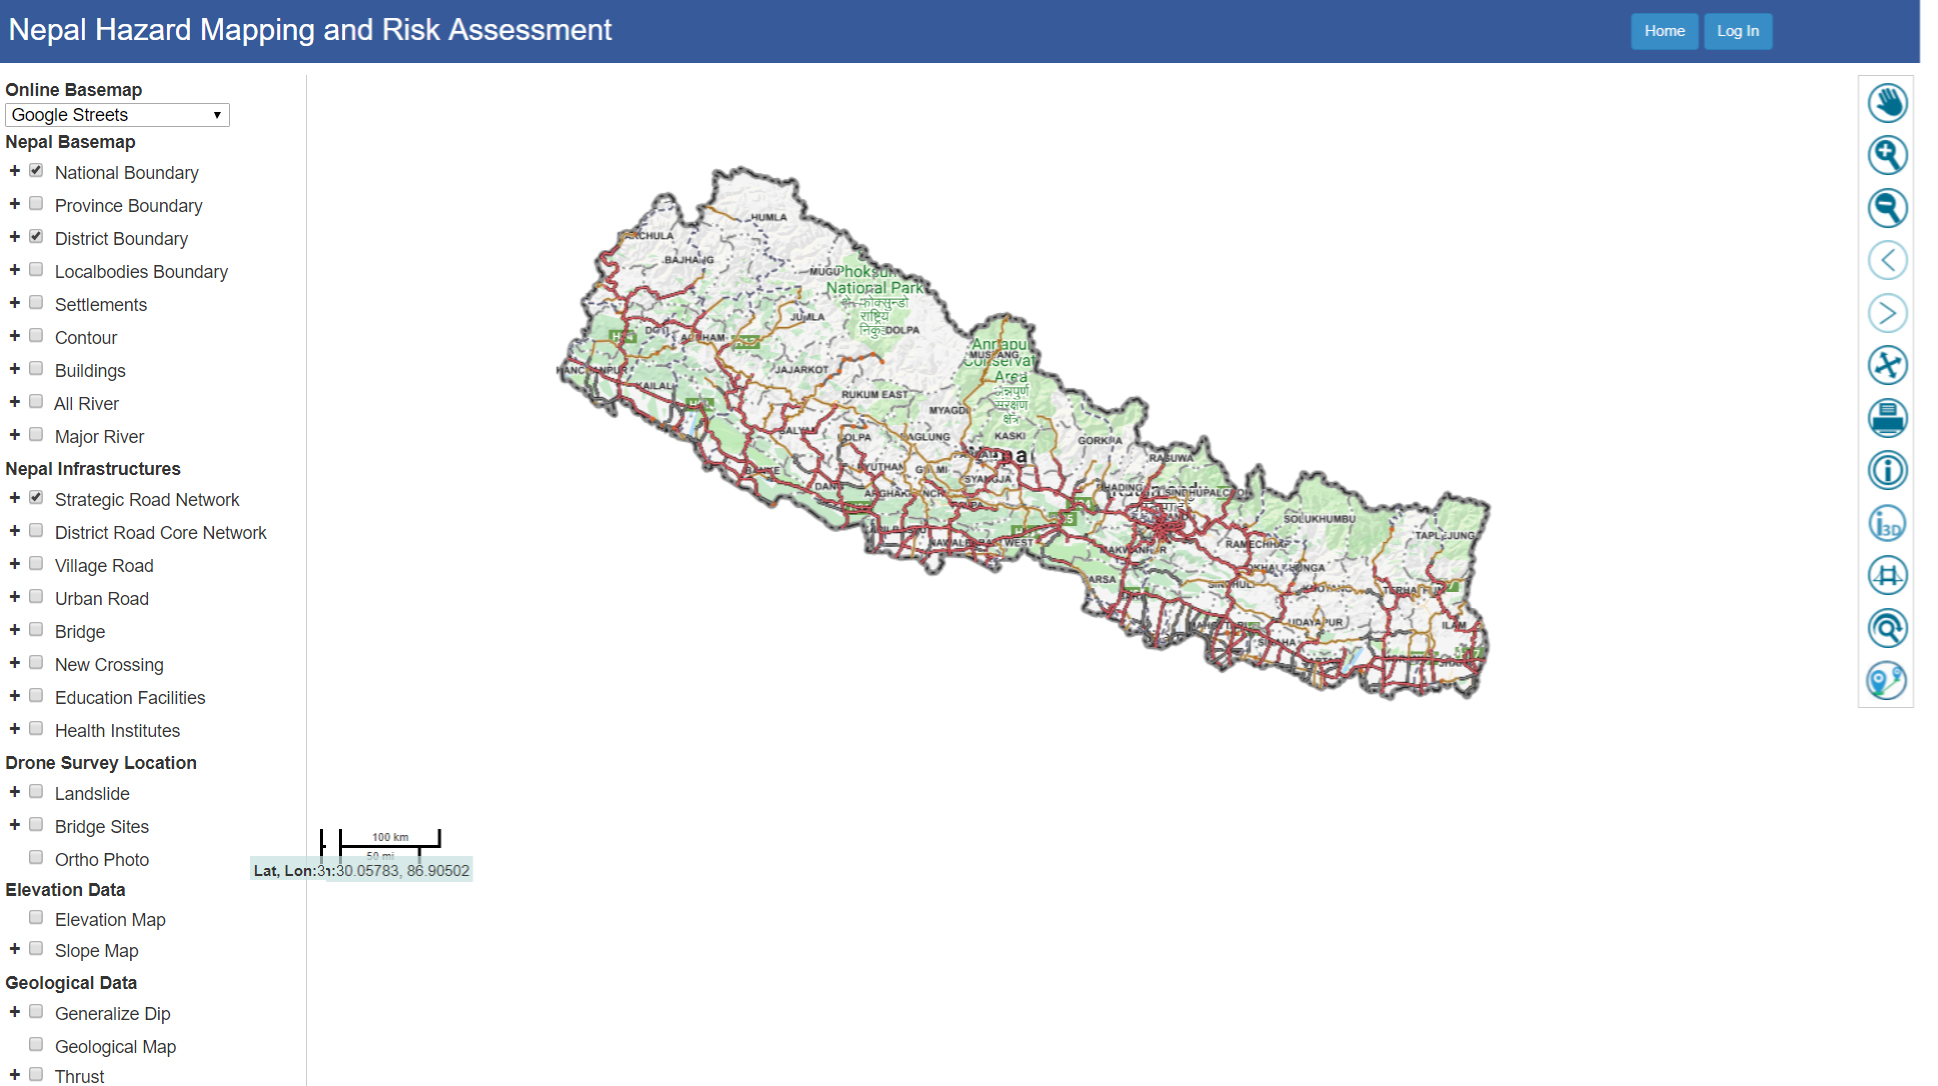 NEPAL HAZARD MAPPING AND RISK ASSESSMENT